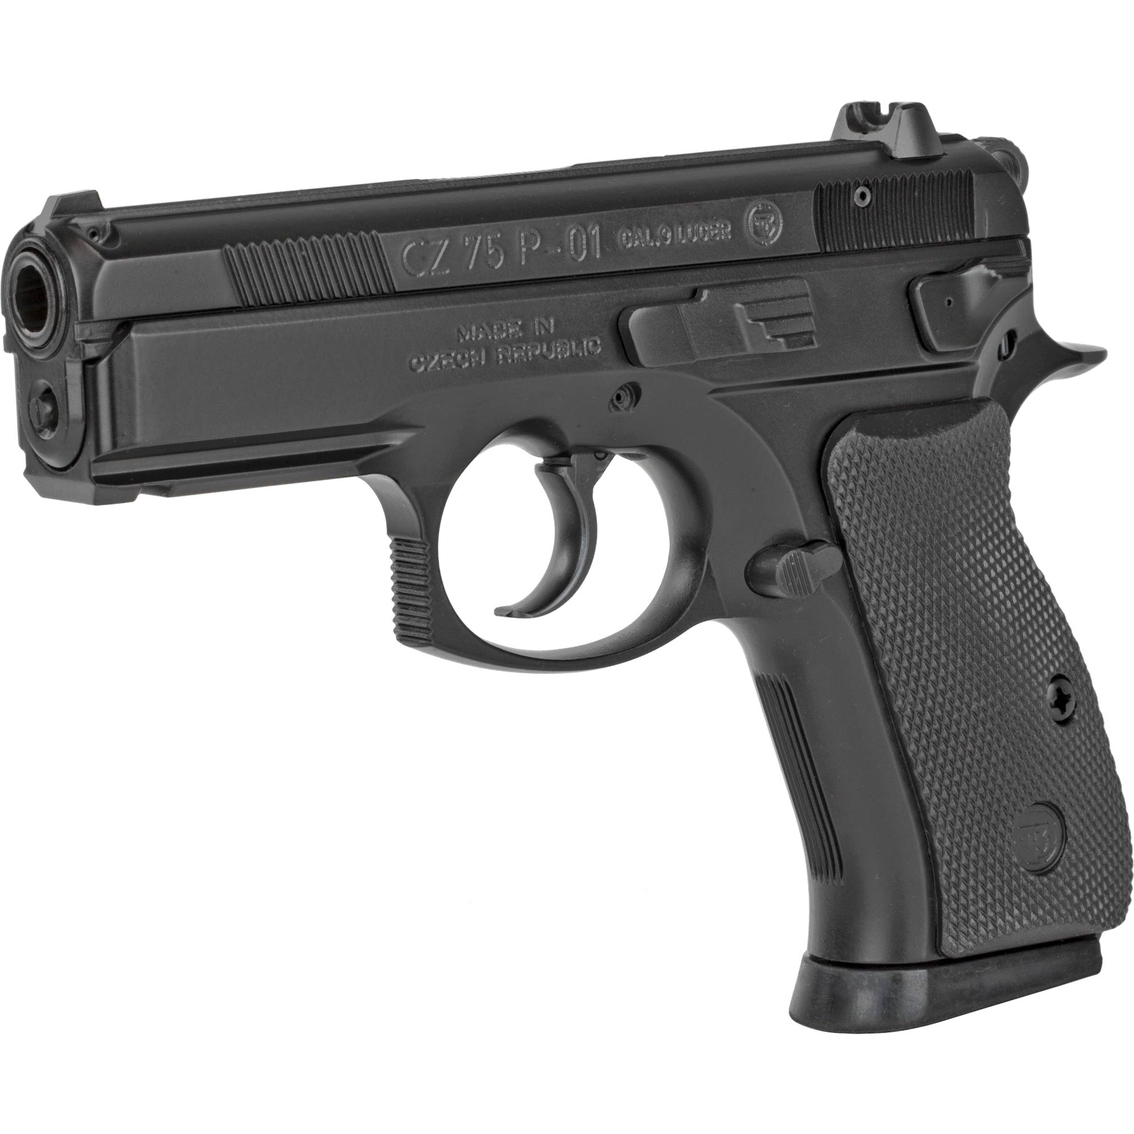 CZ 75 P-01 9MM 3.75 in. Barrel 14 Rds 2-Mags Pistol Black - Image 3 of 3